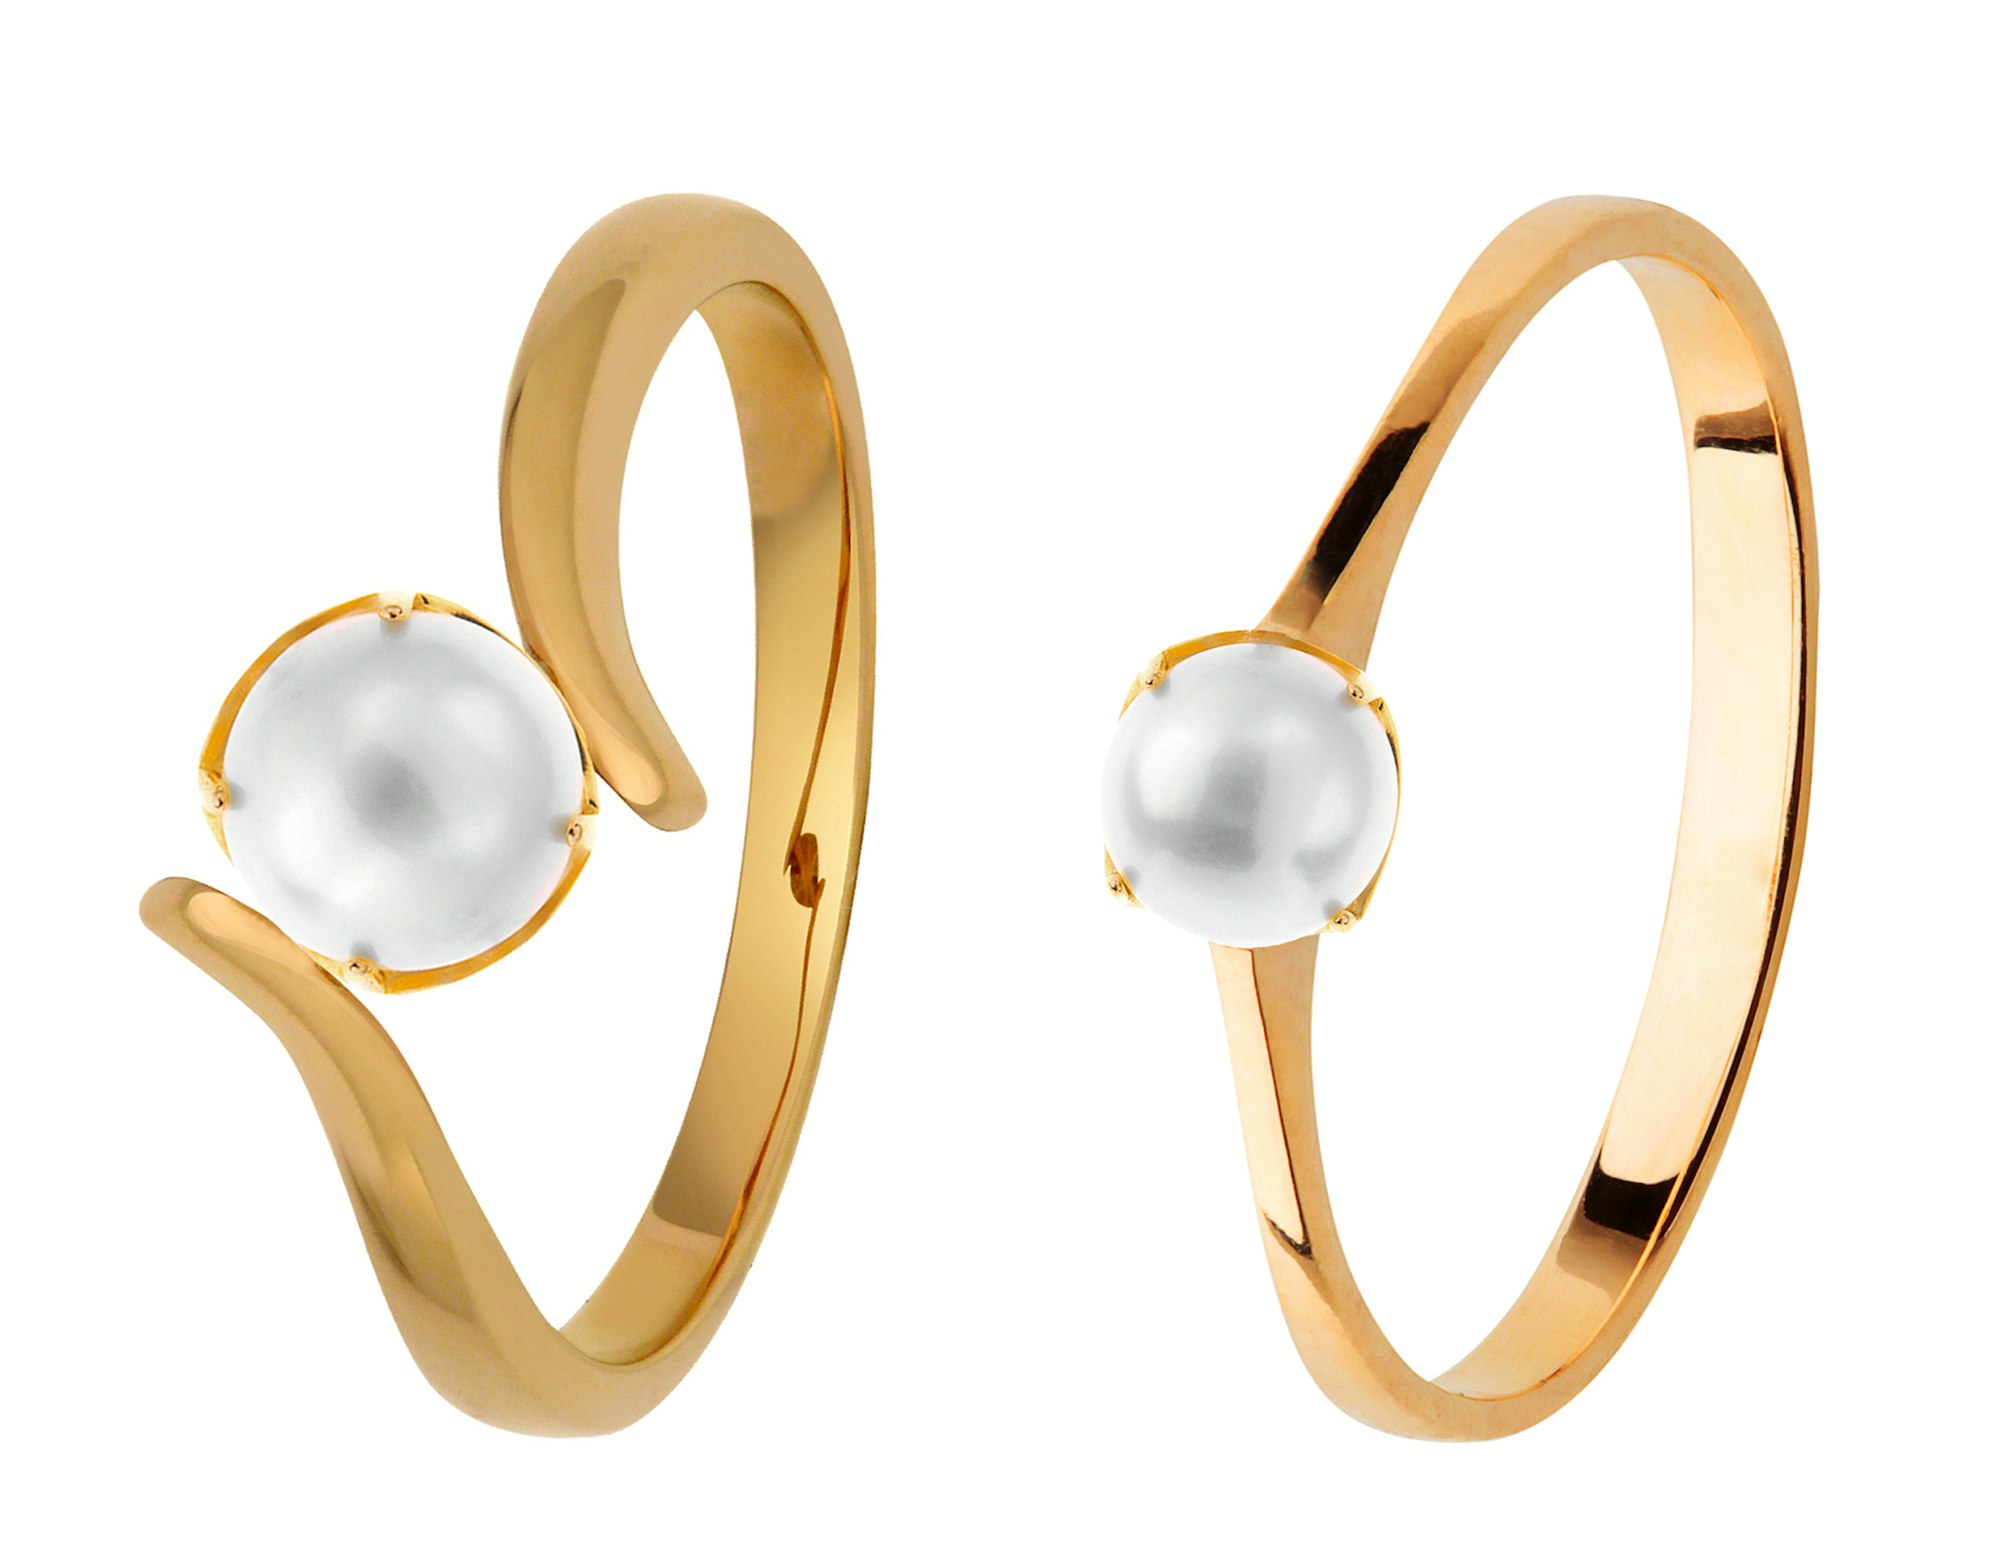 Golden Wedding Rings with pearl